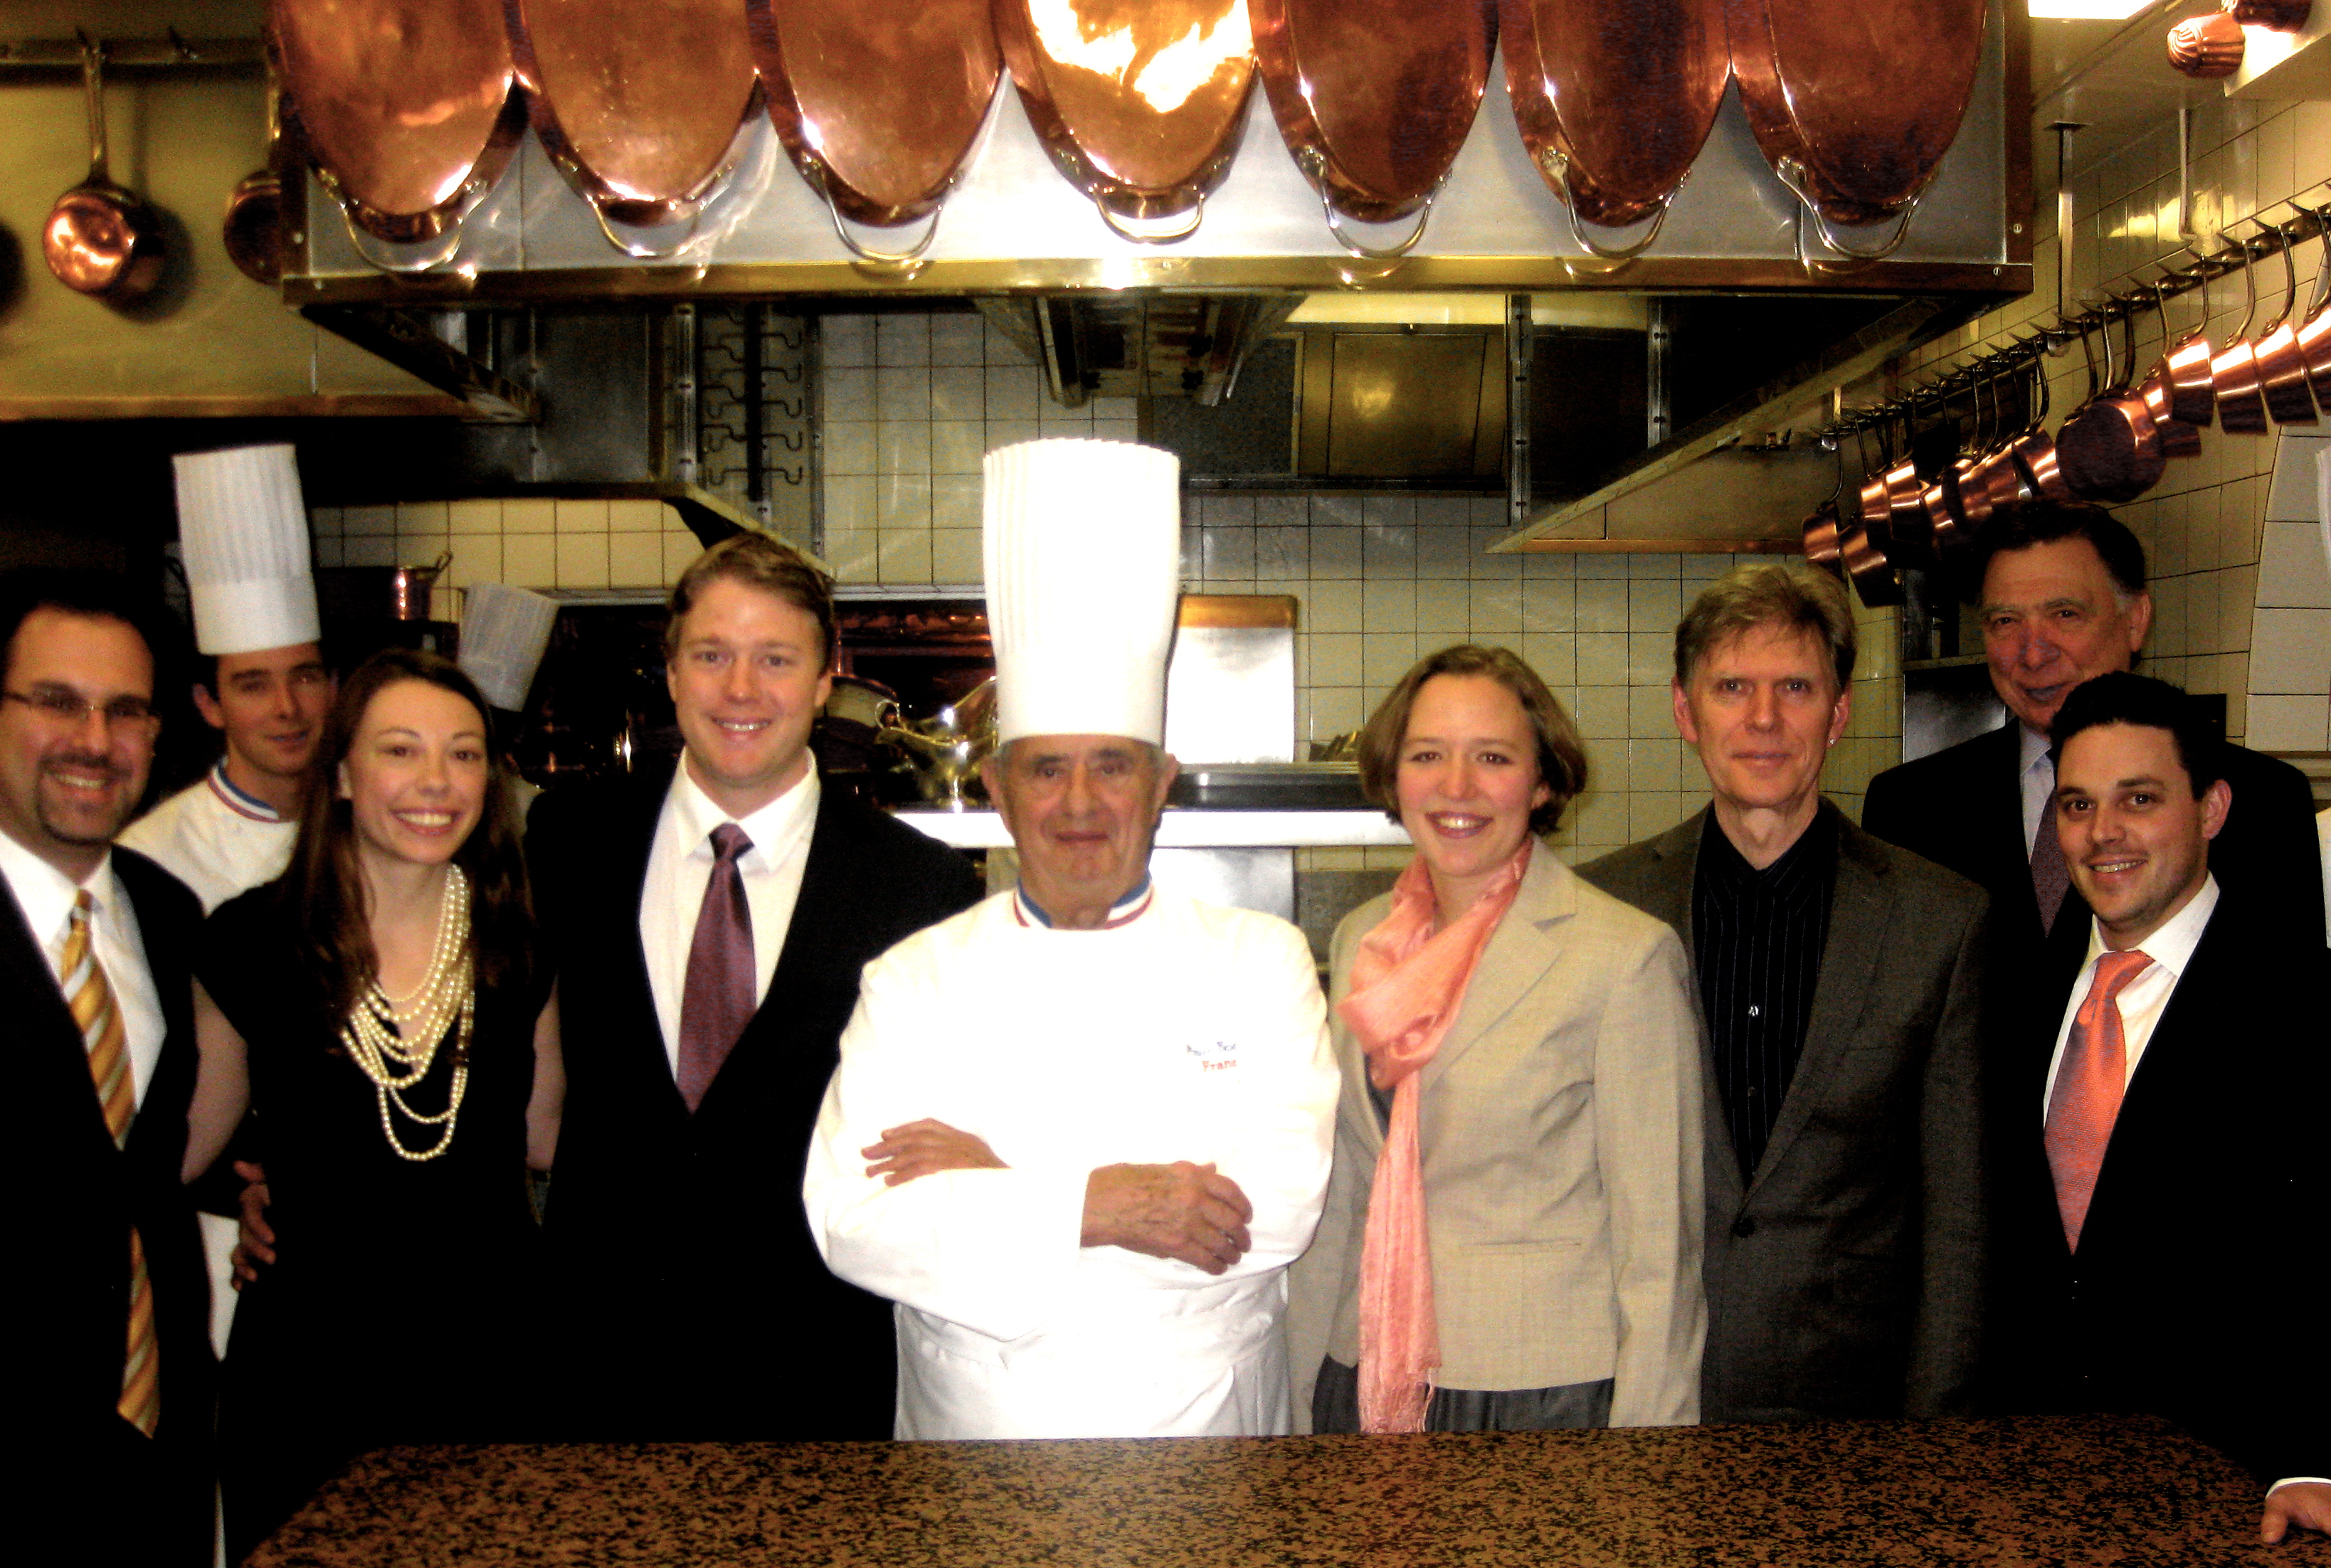 A Bocuse memory.  Team USA's "Inauguration Dinner" hosted by Chef Paul Bocuse.  January 20, 2009.  That's Gavin on the far right, and me on the left. 